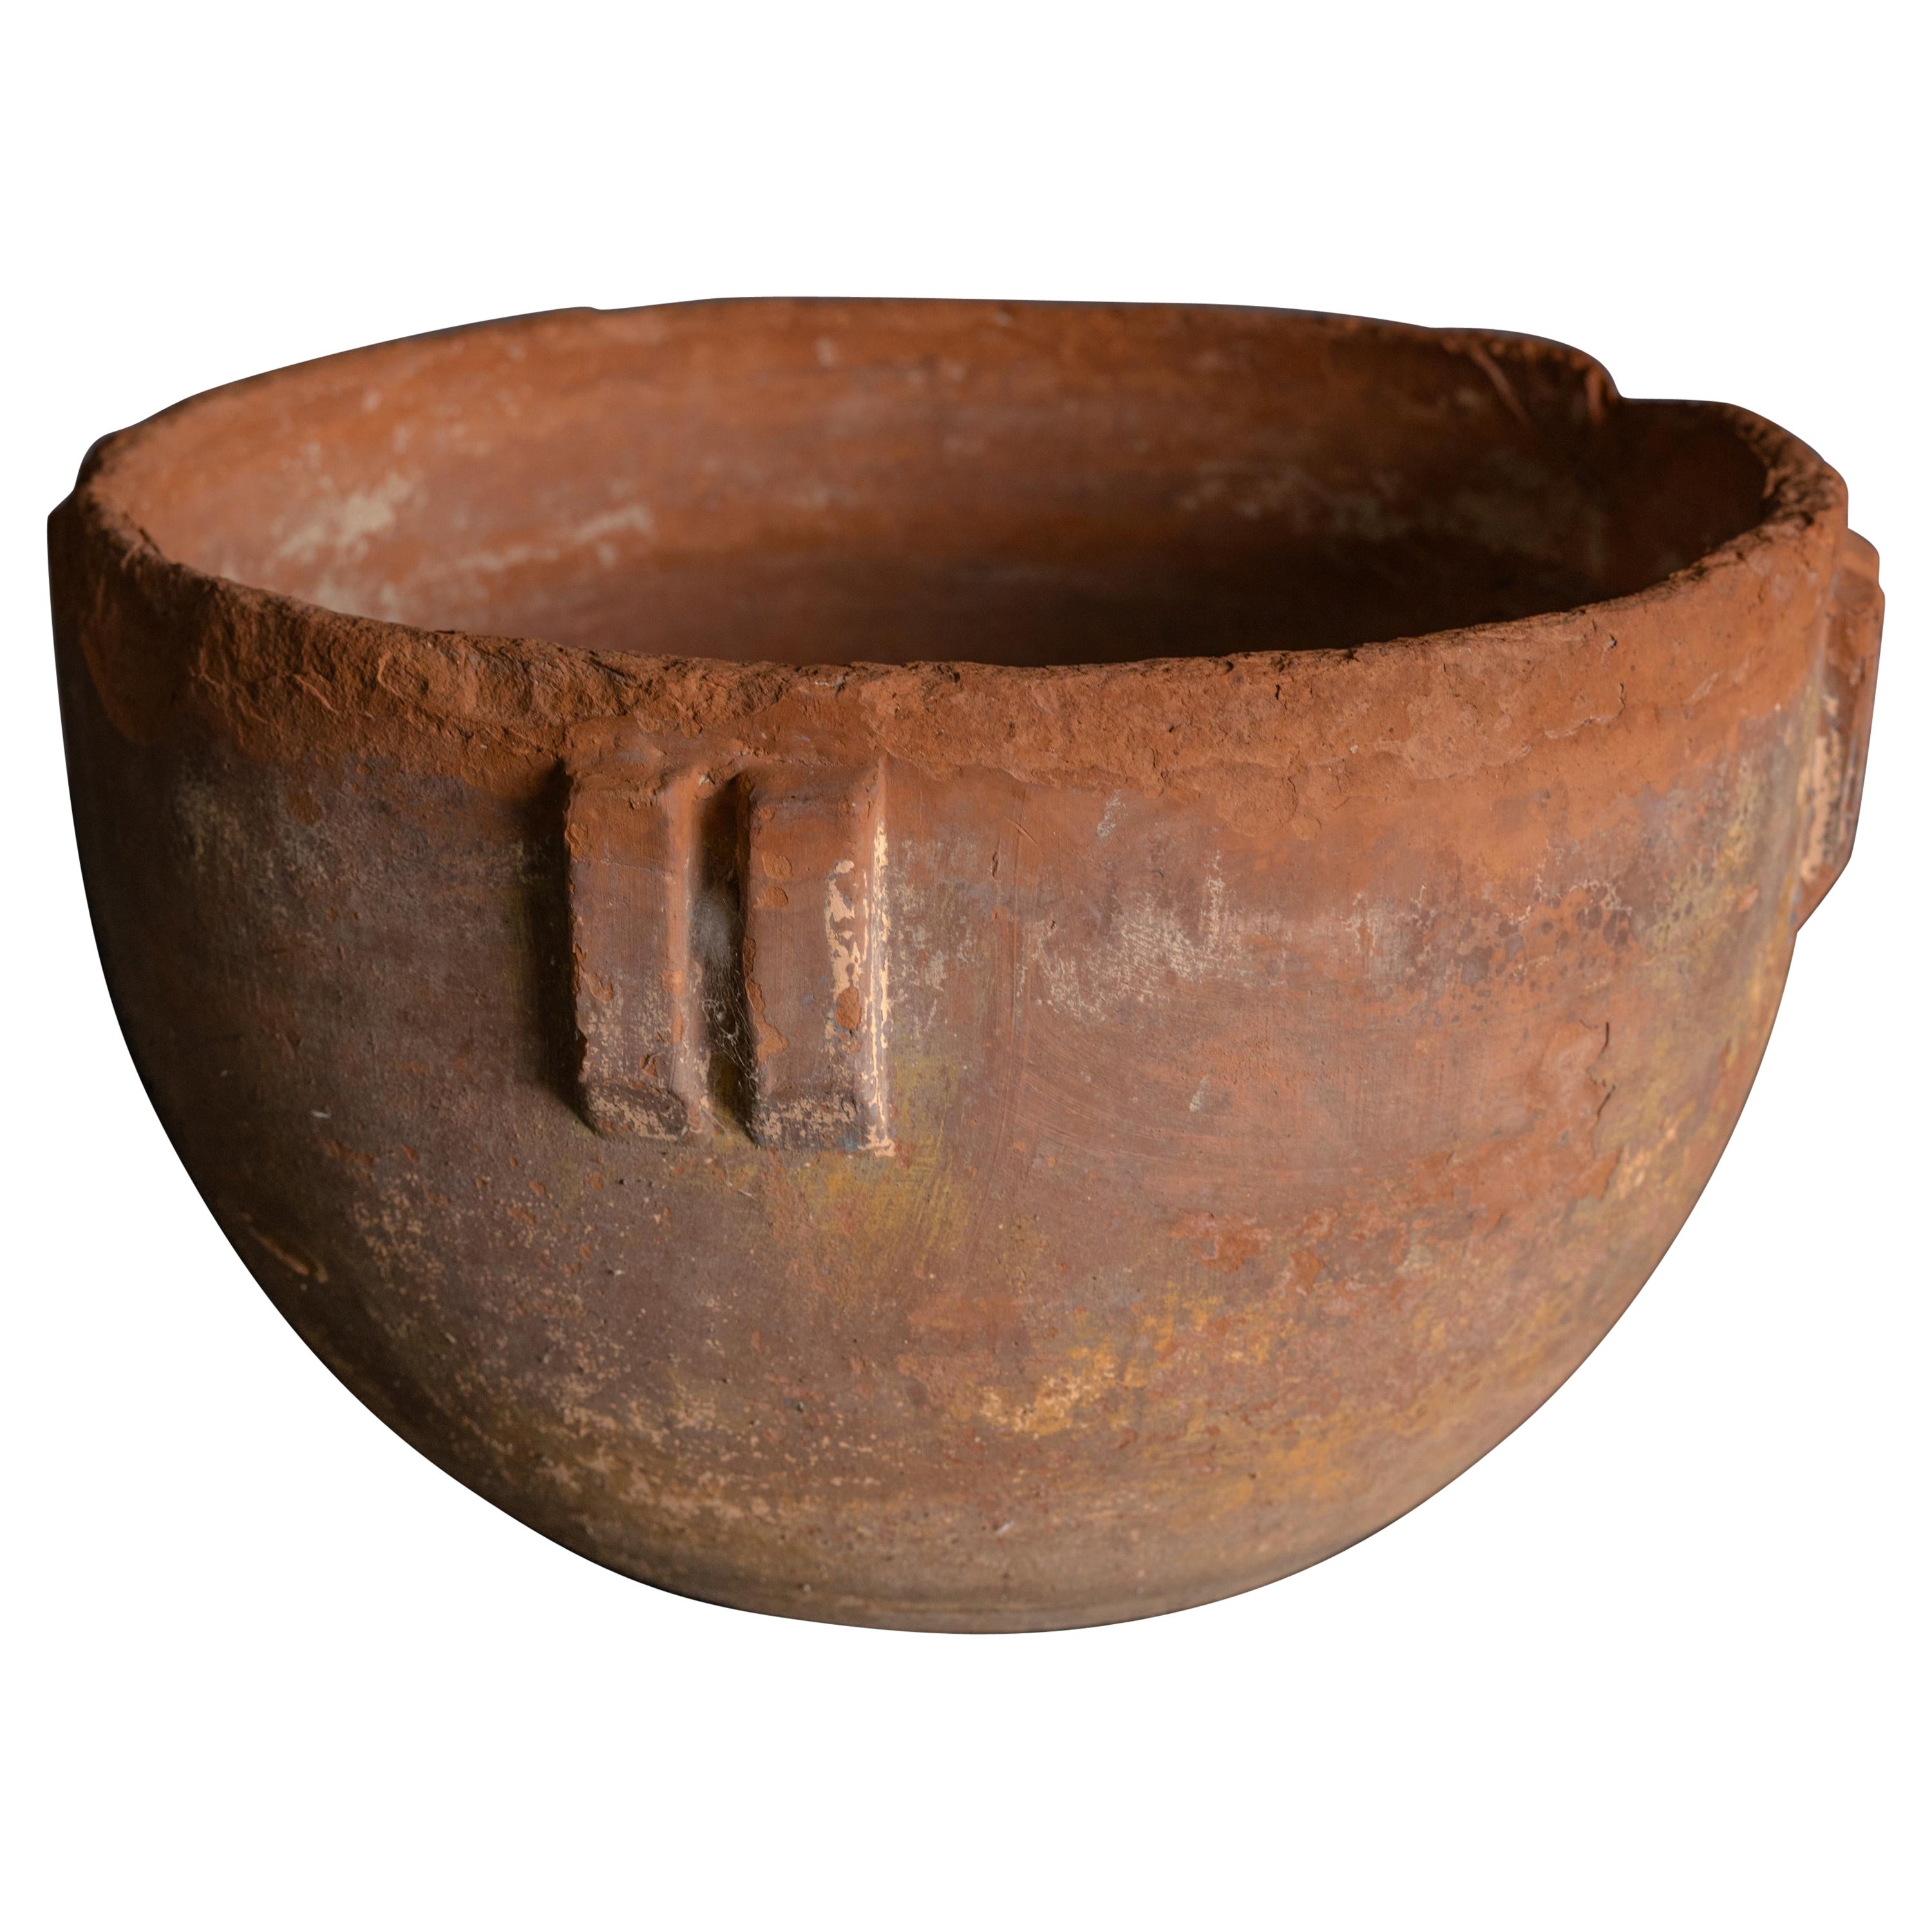 Terracotta "Indian Pot" by Bauer Pottery